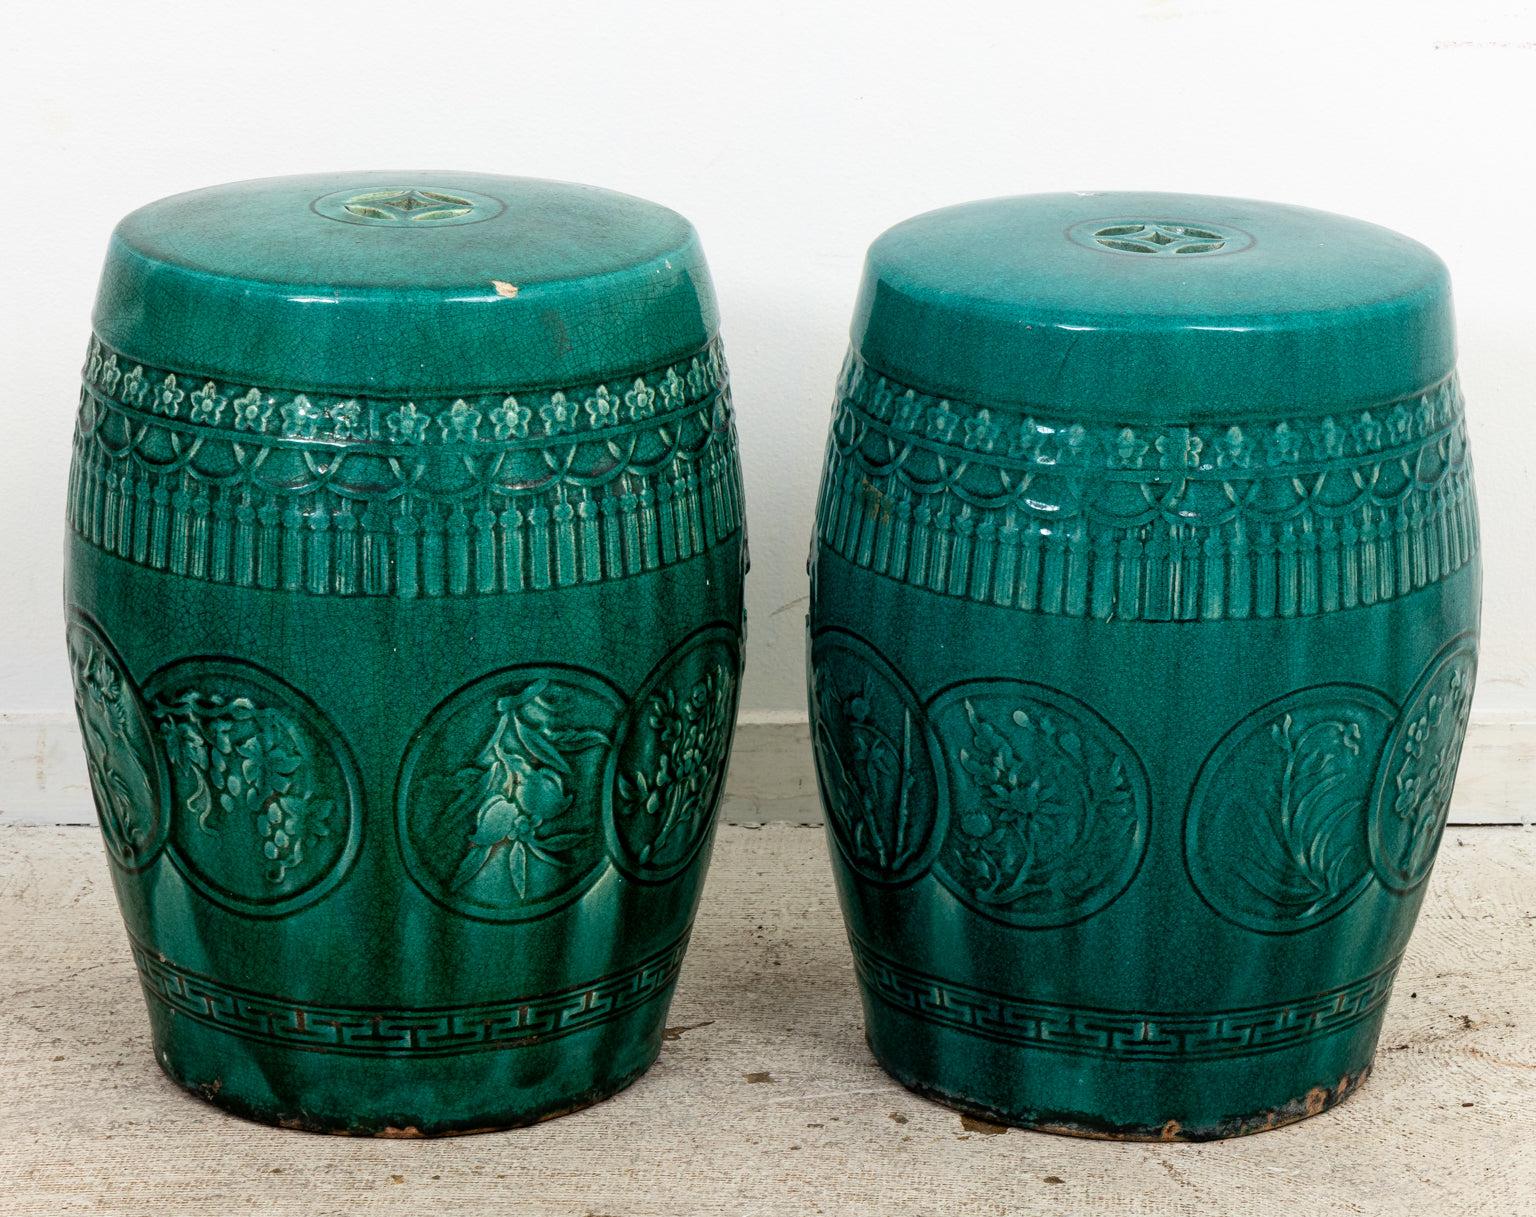 Pair green glazed garden stools with pierced bat form handles. Wear consistent with age.